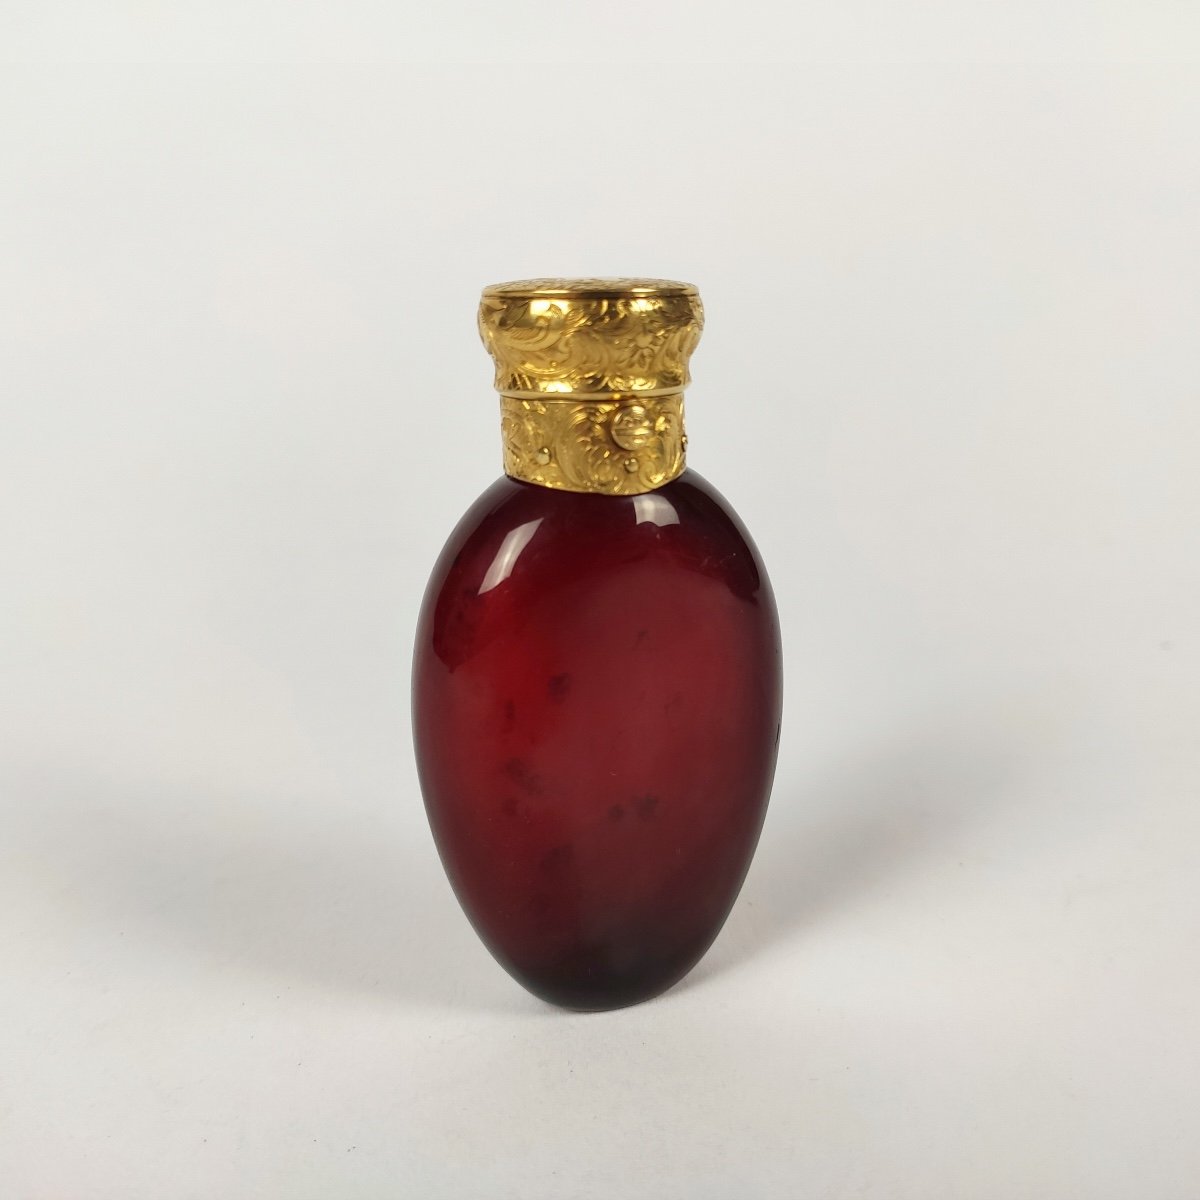 Magnificent Salt / Perfume Bottle In Red Glass And Large Gold Frame Engraved With Foliage. 